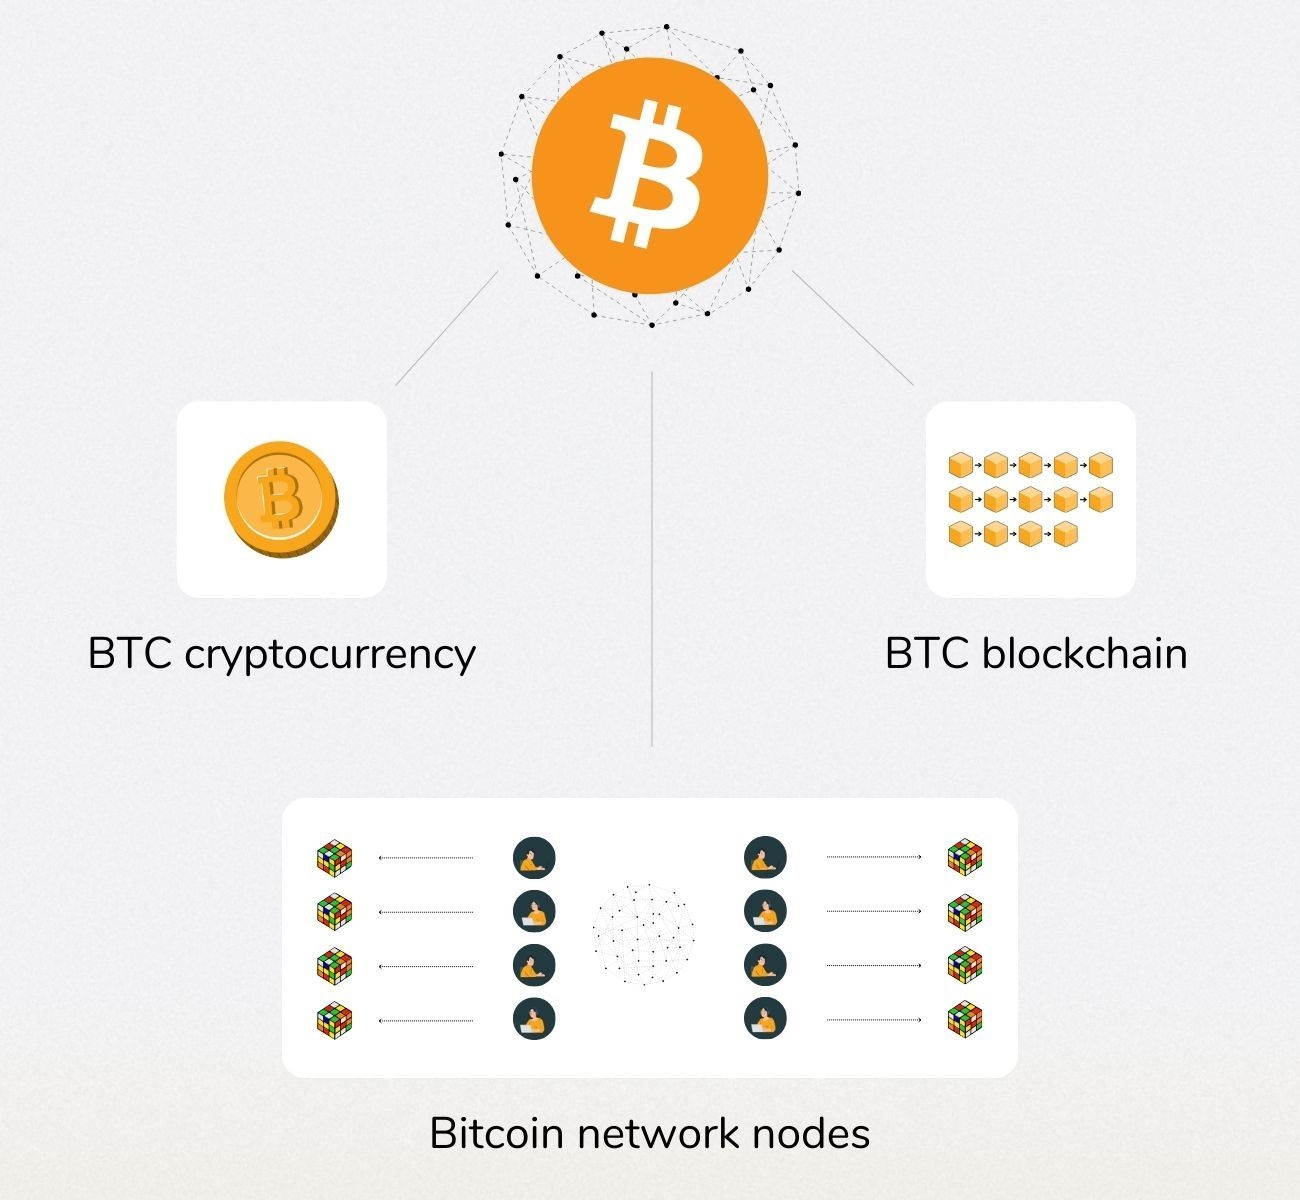 Graph showing the Bitcoin ecosystem with cryptocurrency and nodes